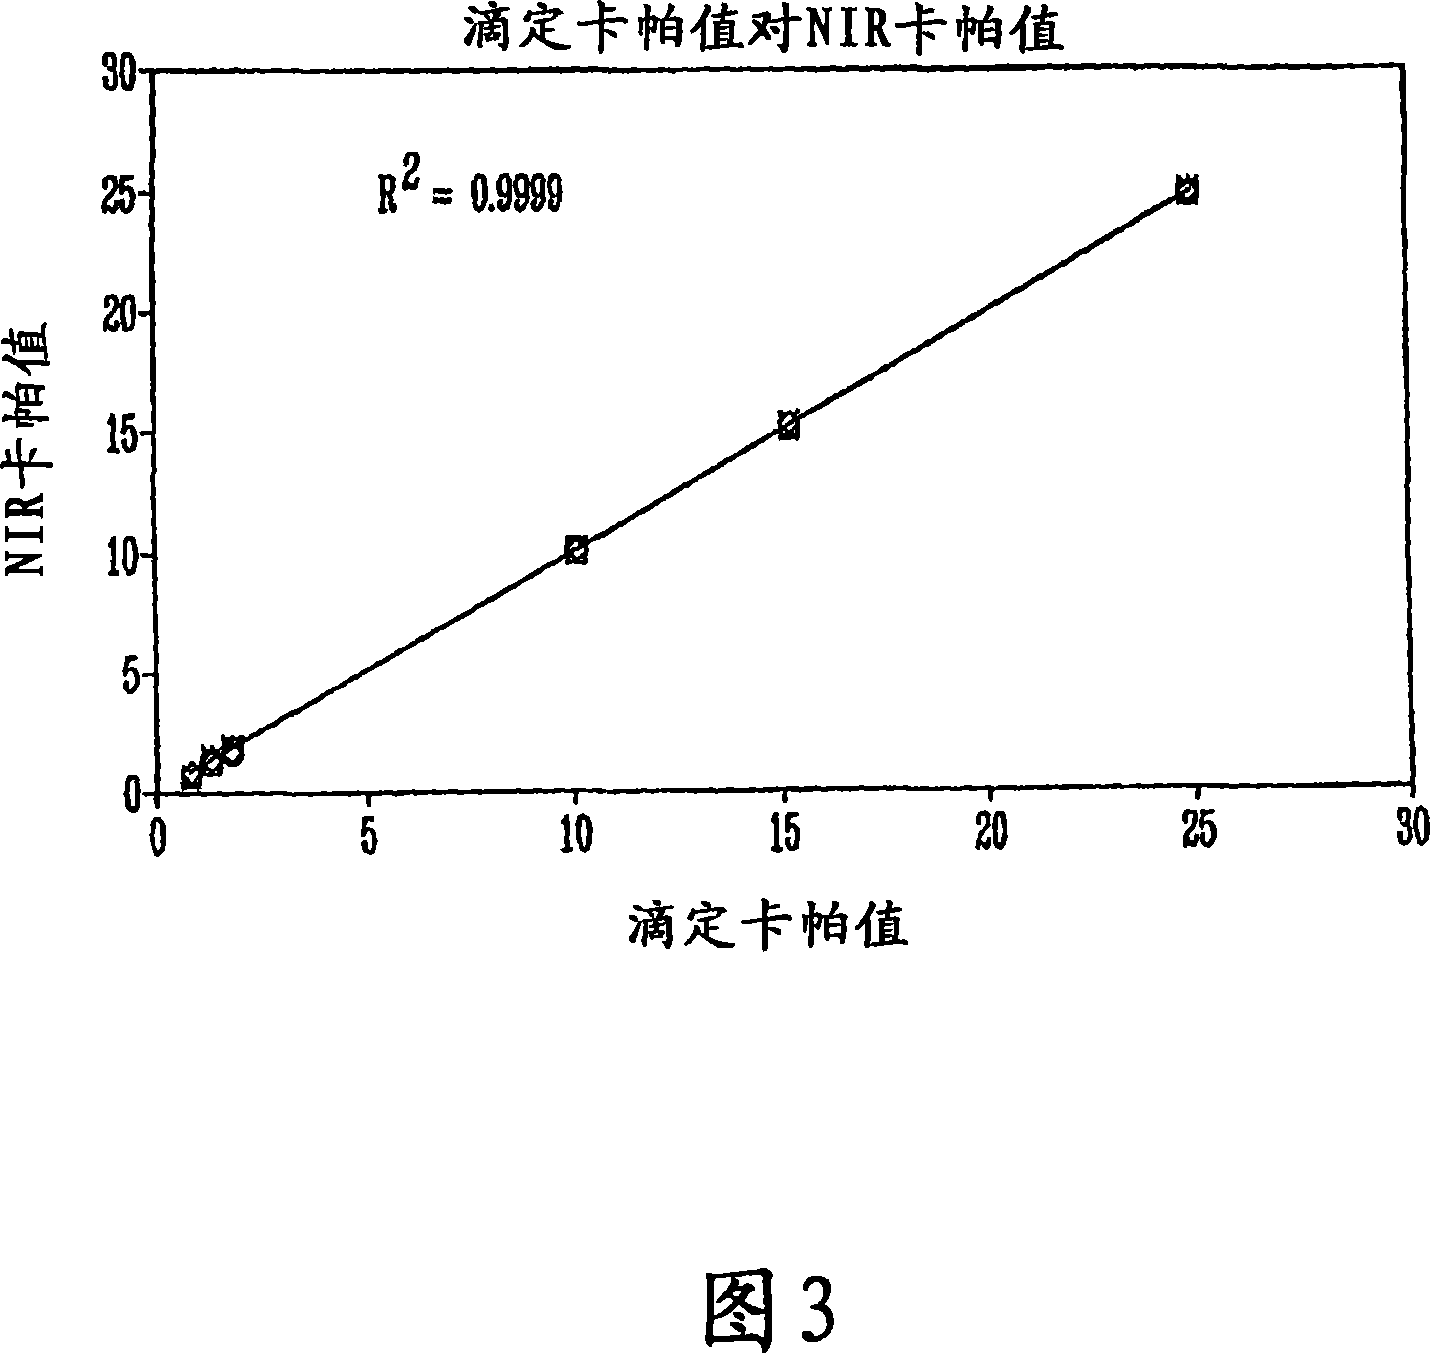 Method for determining chemical pulp kappa number with visible-near infrared spectrometry